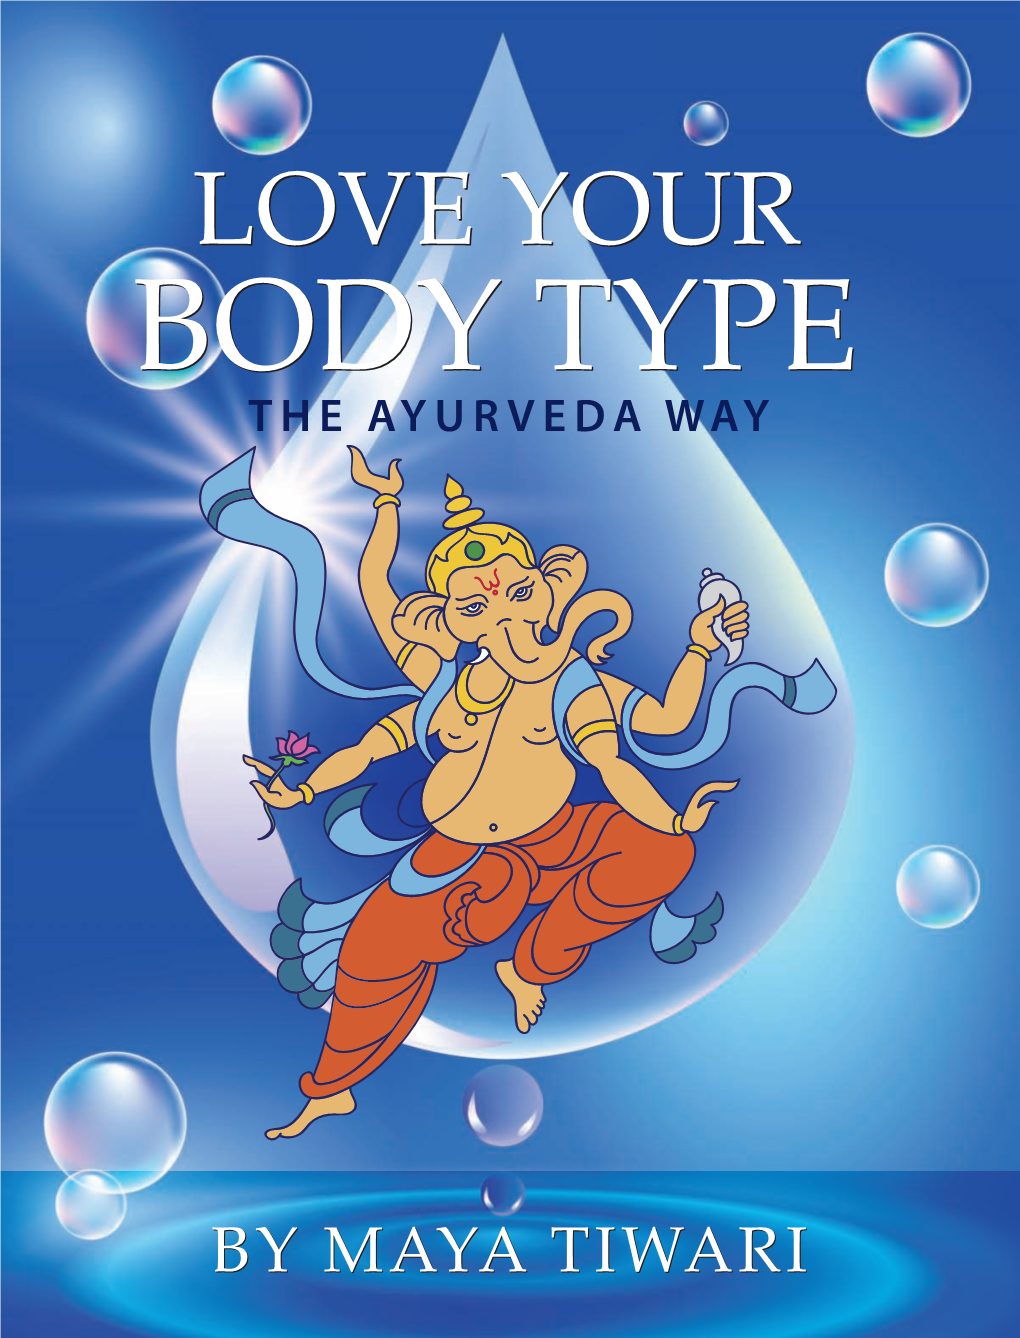 LOVE YOUR BODY TYPE of the AYURVEDA WAY